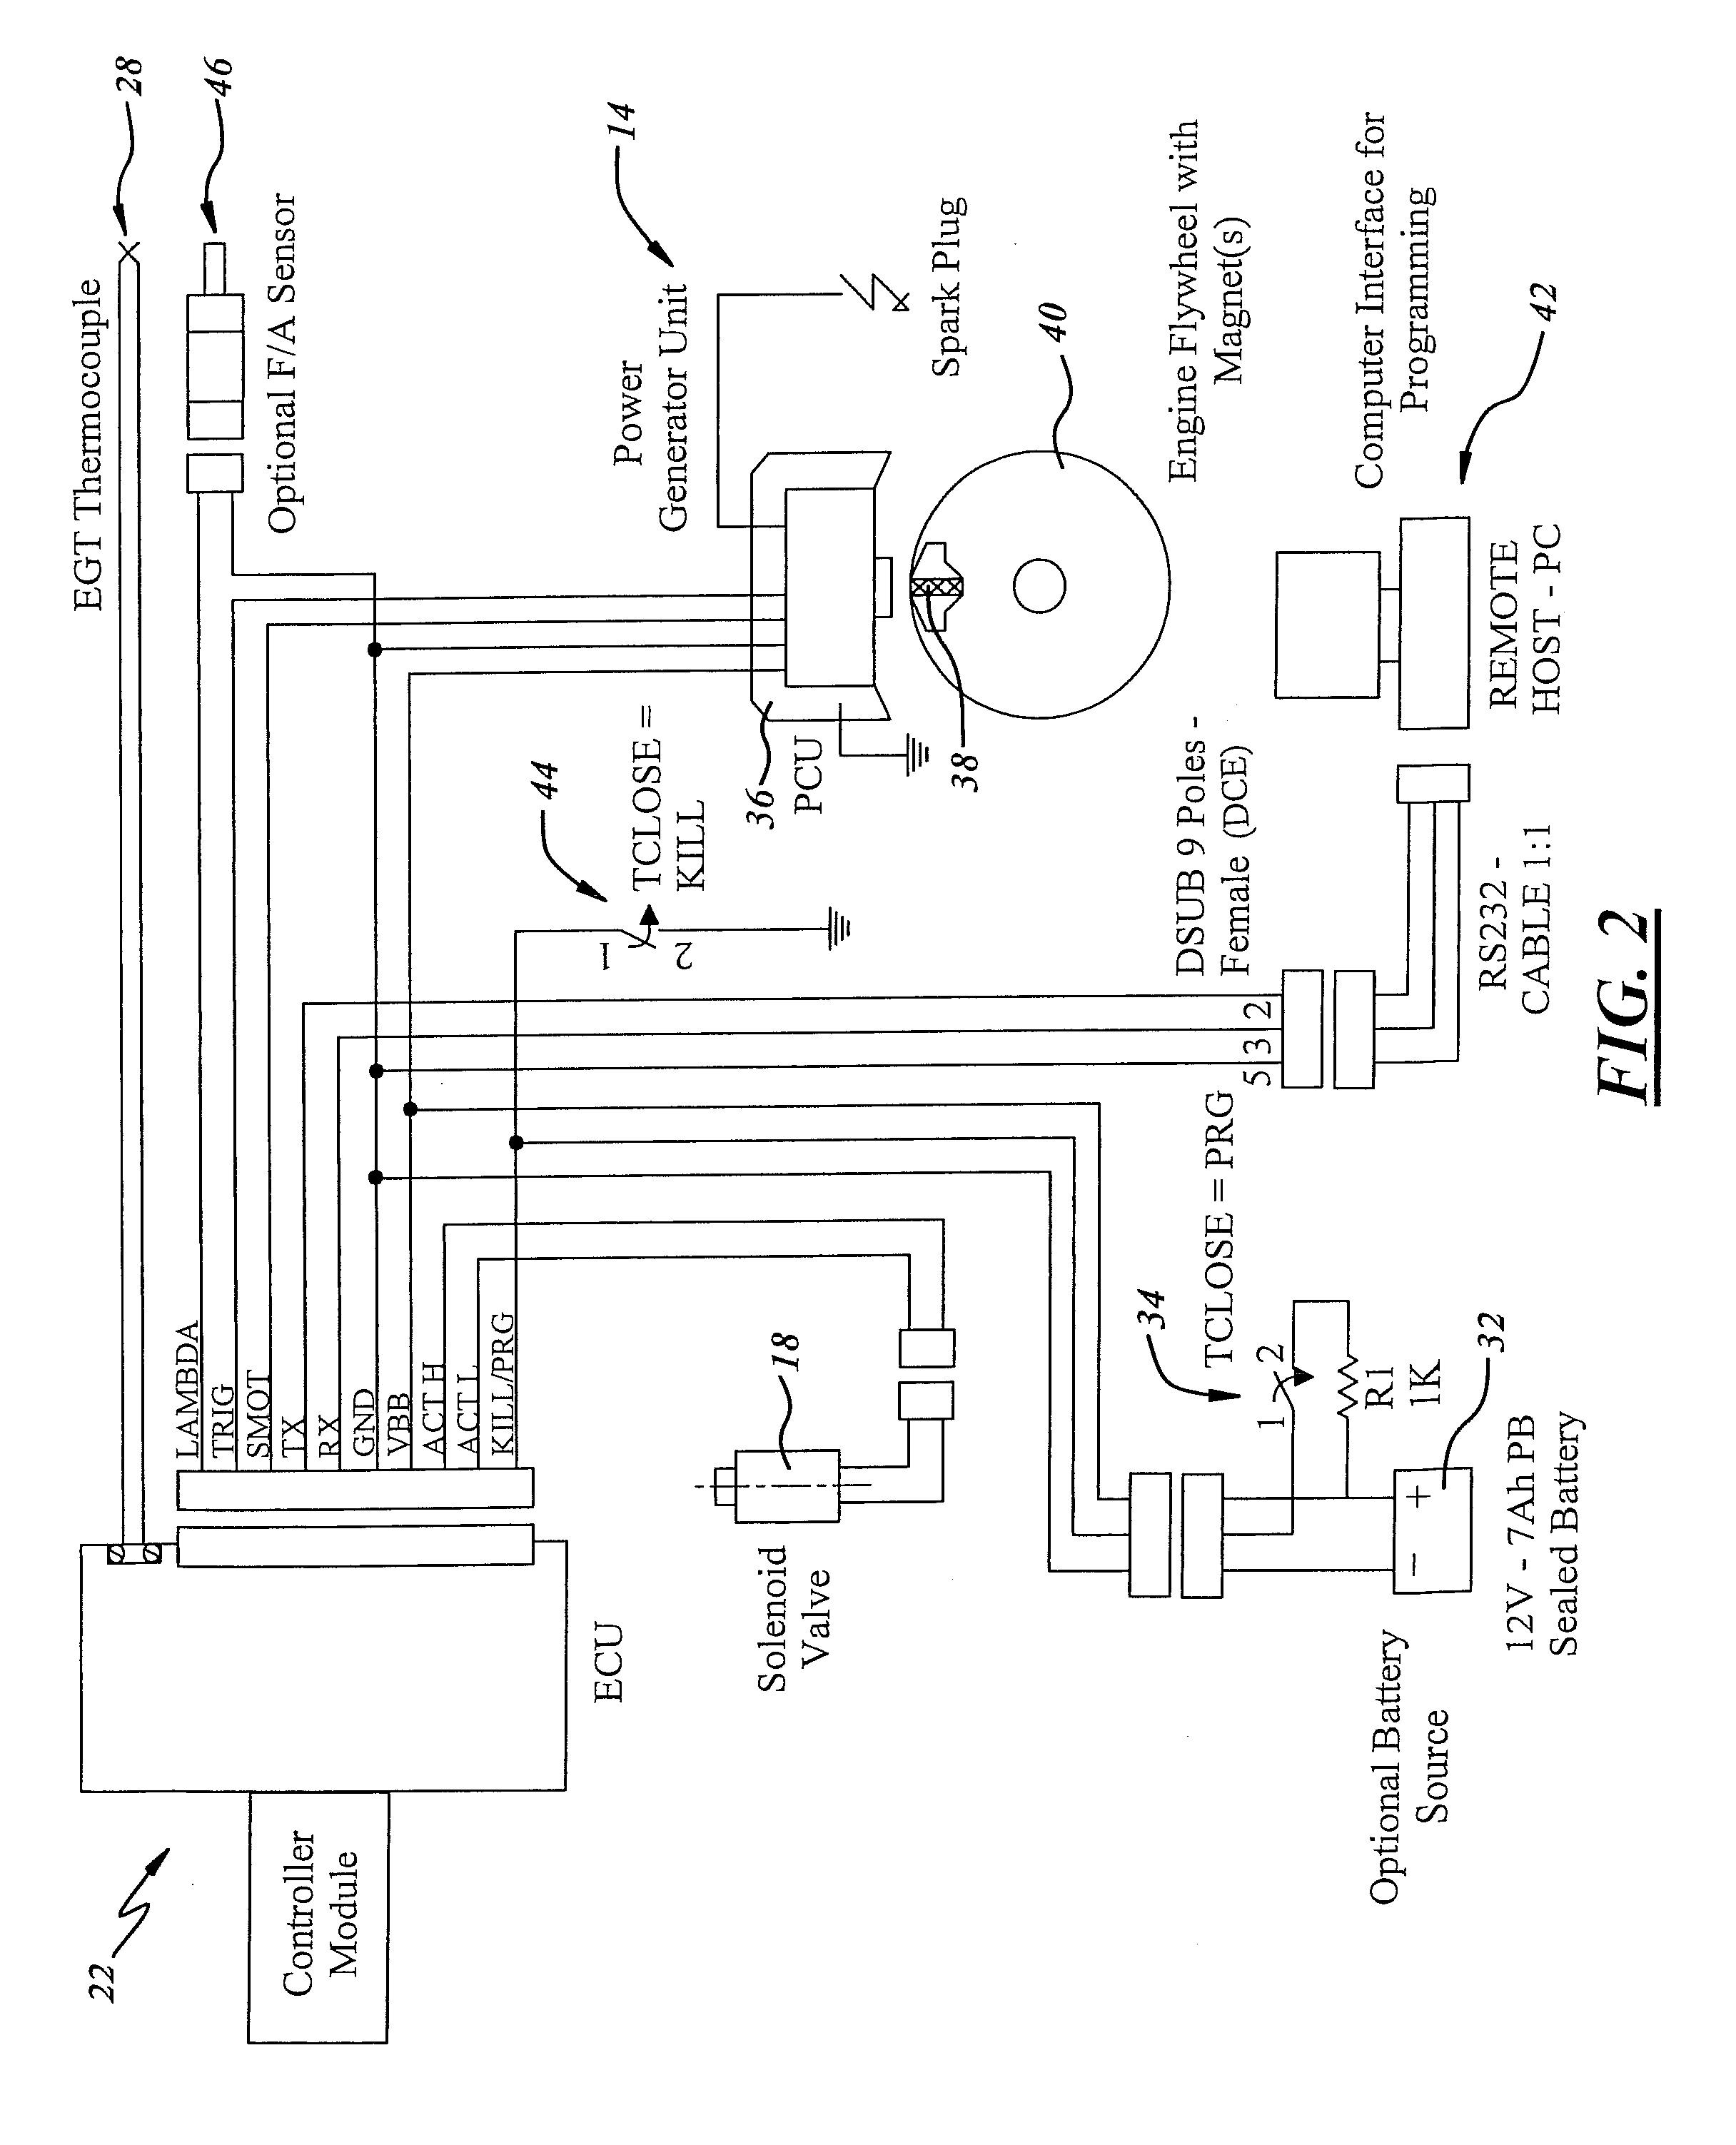 Engine fuel delivery systems, apparatus and methods